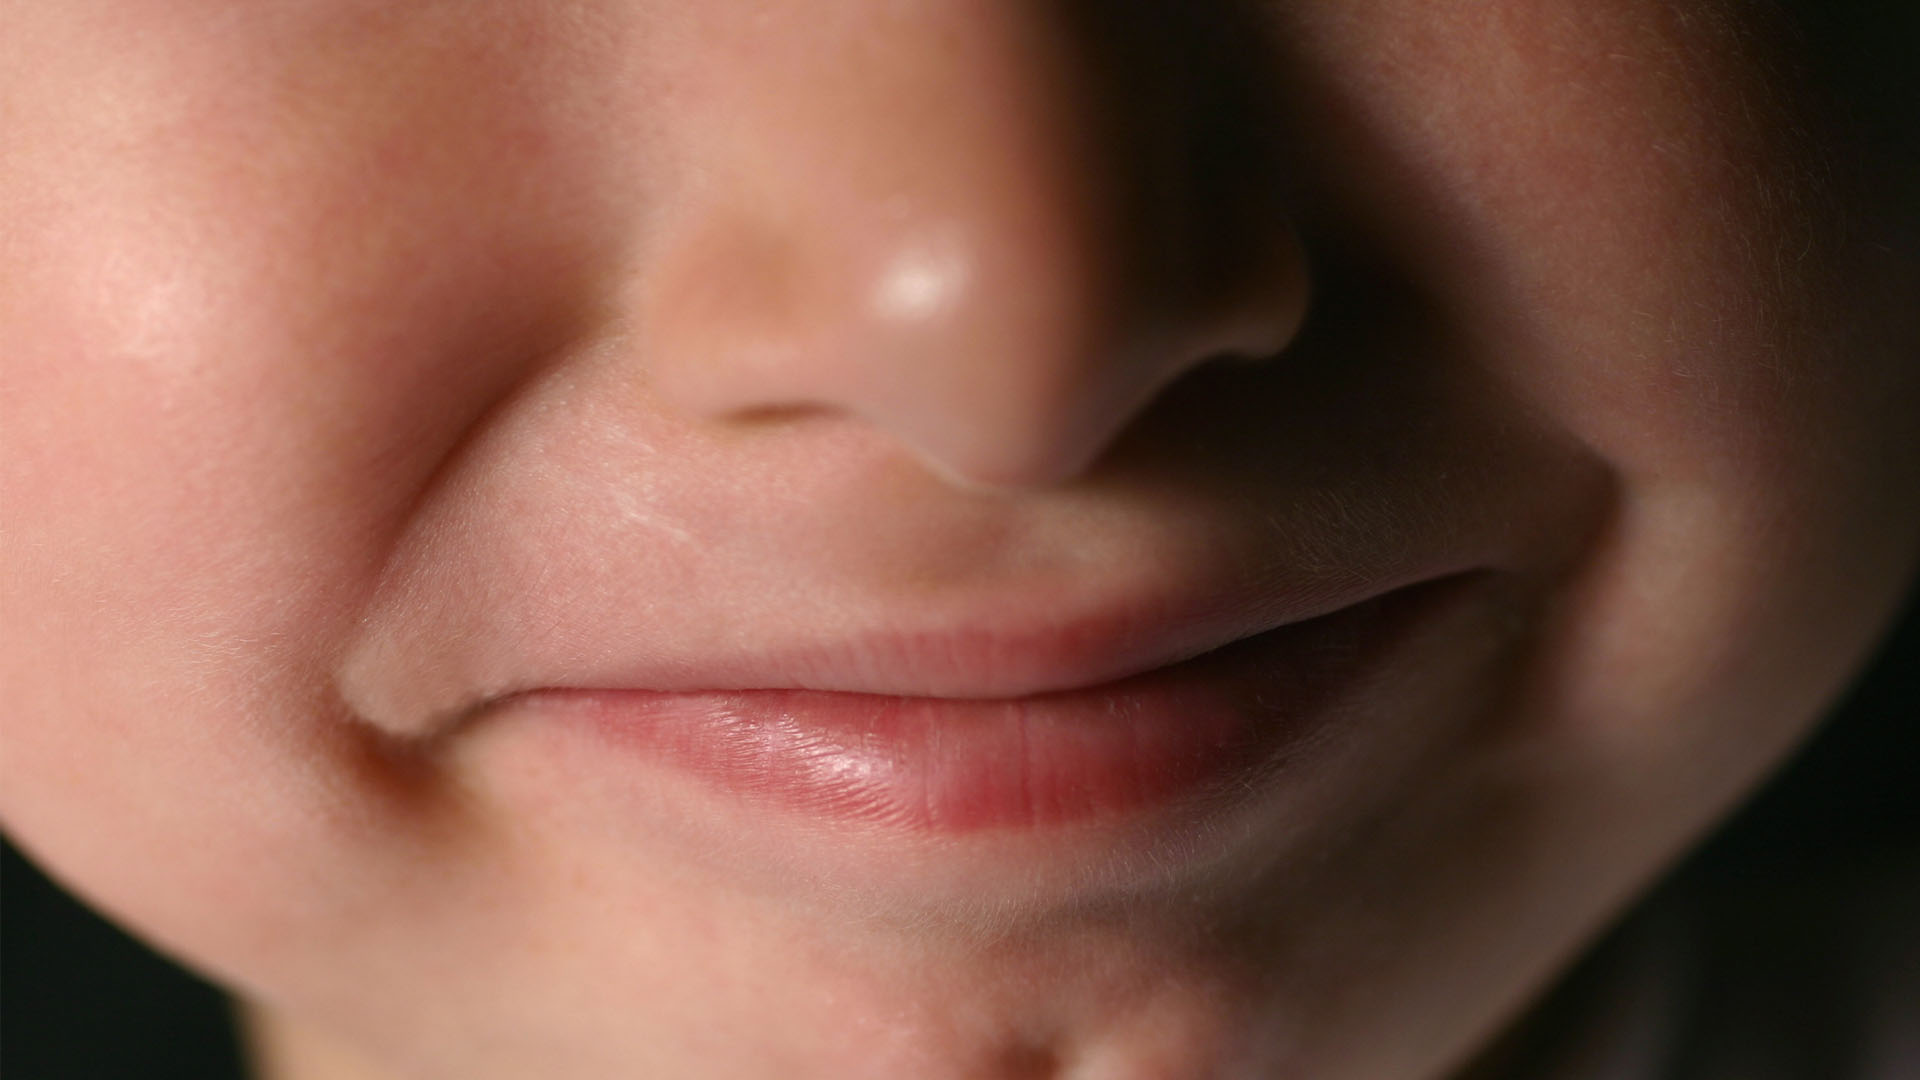 The image shows a close up of the face of a young boy with a cleft chin or chin